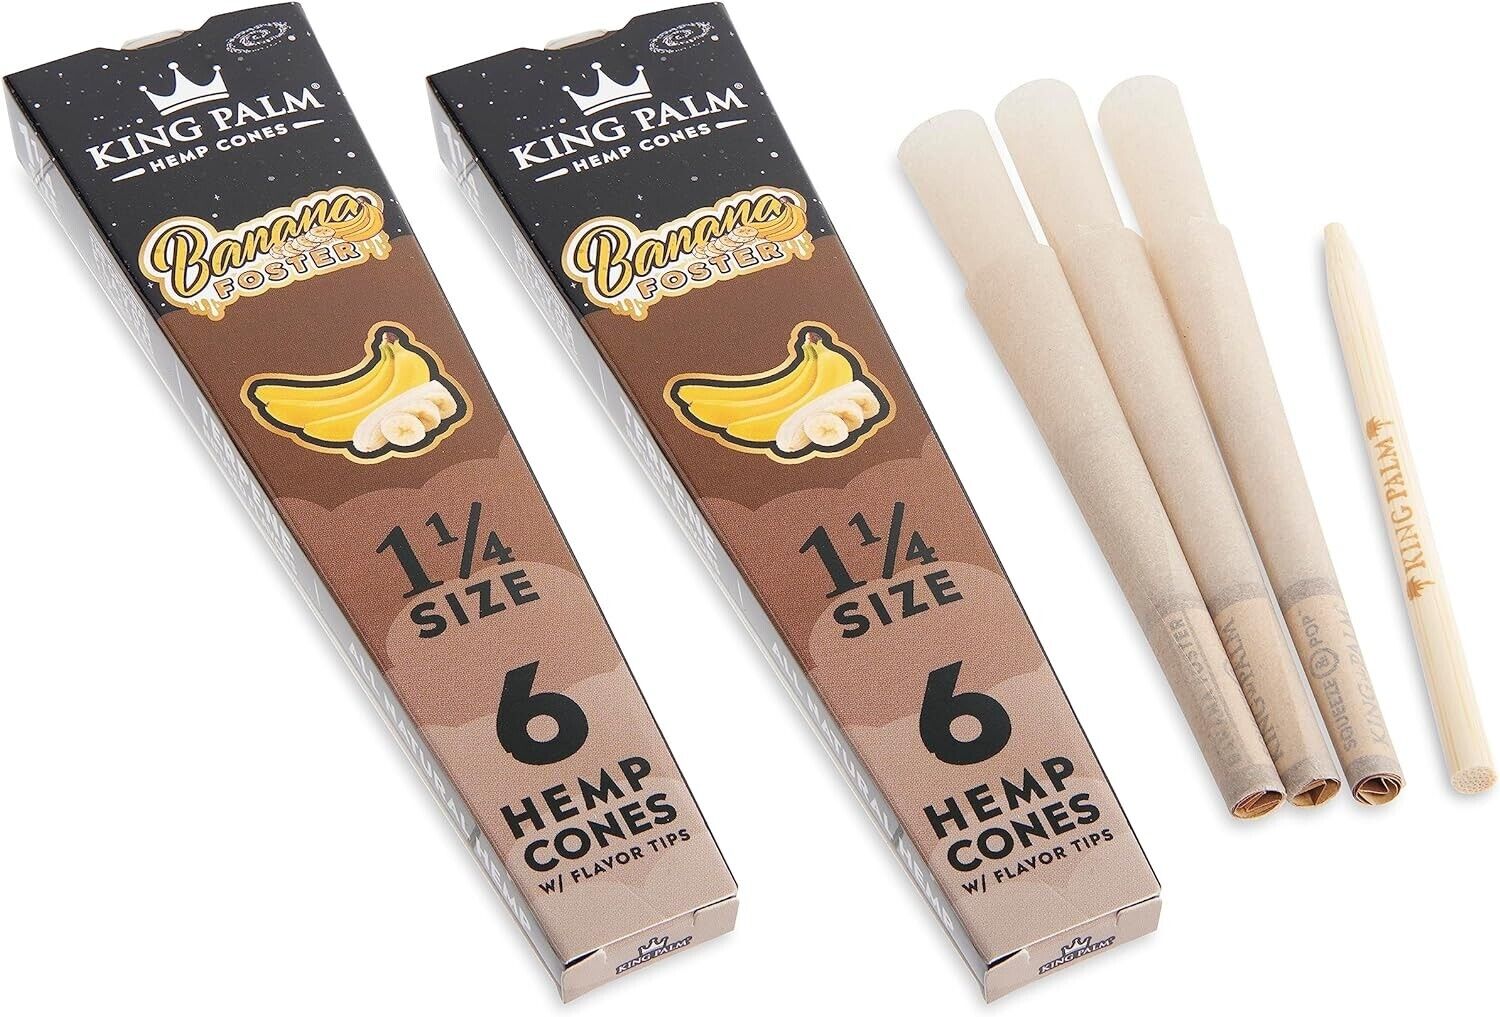 KingPalm Prerolled Cones &Filter Tips-2 Packs-(Banana Foster) 1 1/4, 6 per pack.